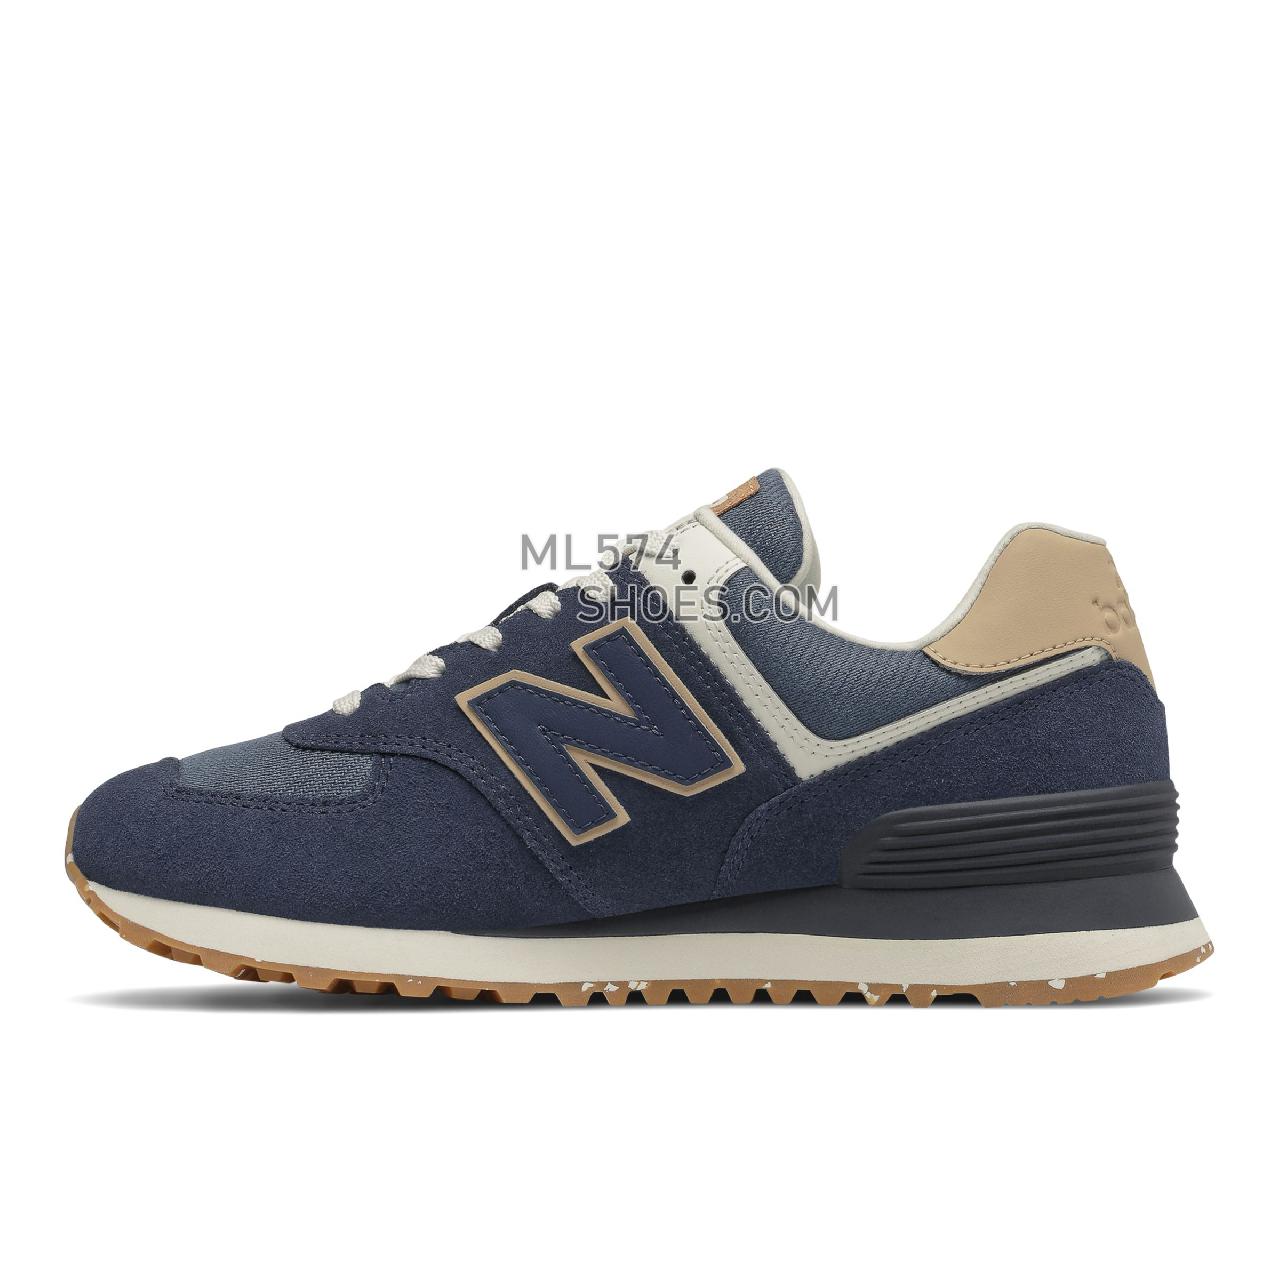 New Balance 574 - Women's Classic Sneakers - Navy with Incense - WL574SO2